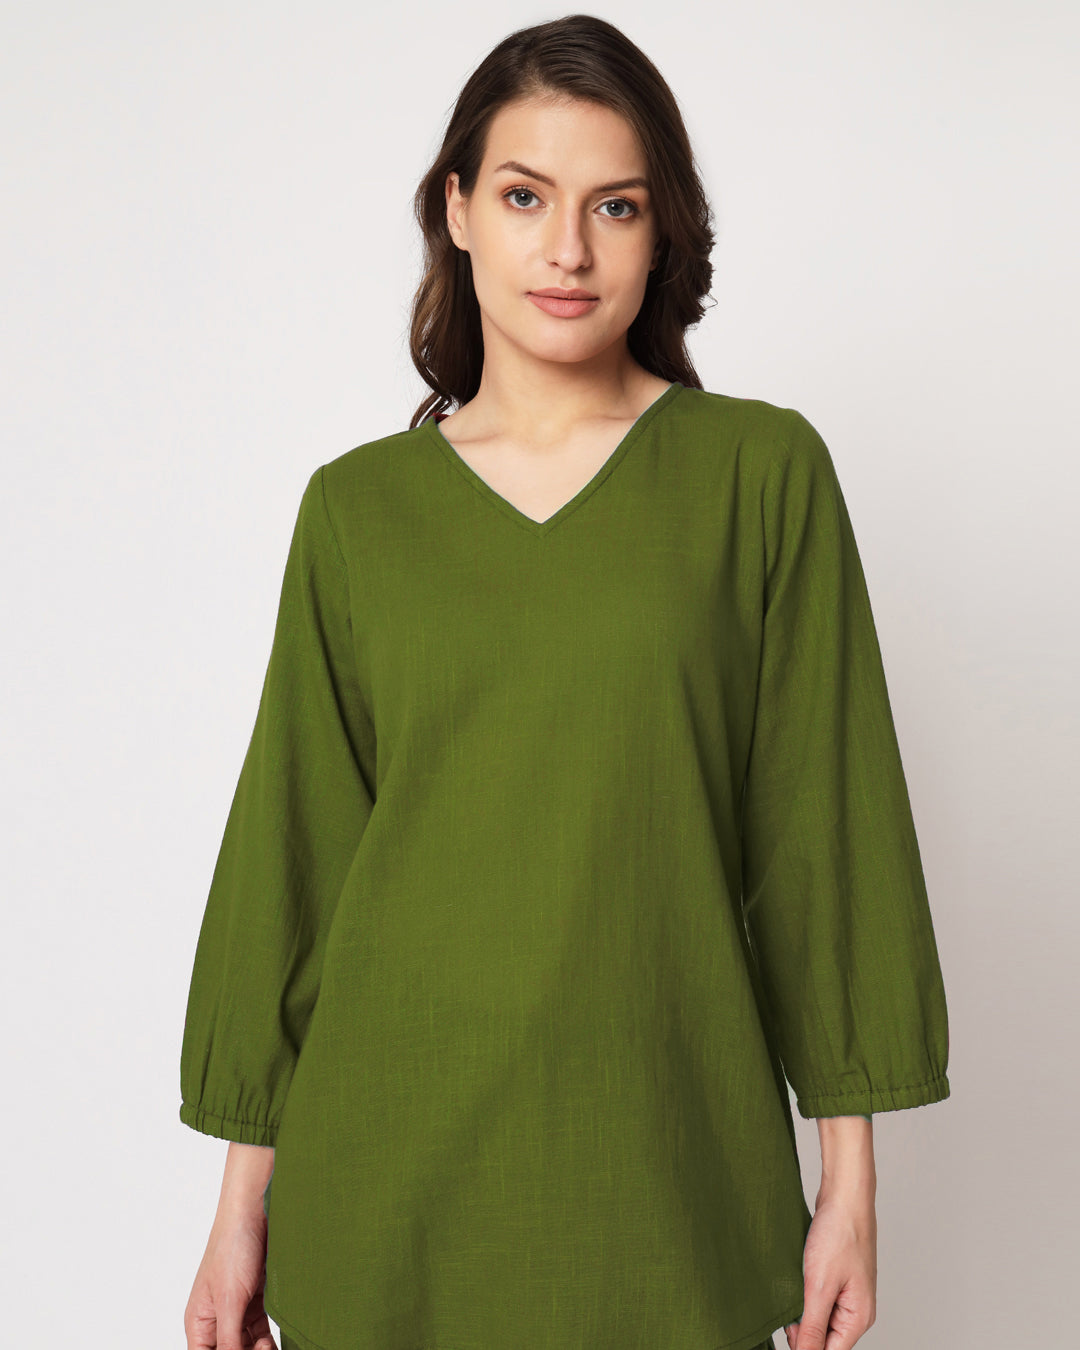 Greening Spring Bishop Sleeves Solid Top (Without bottoms)